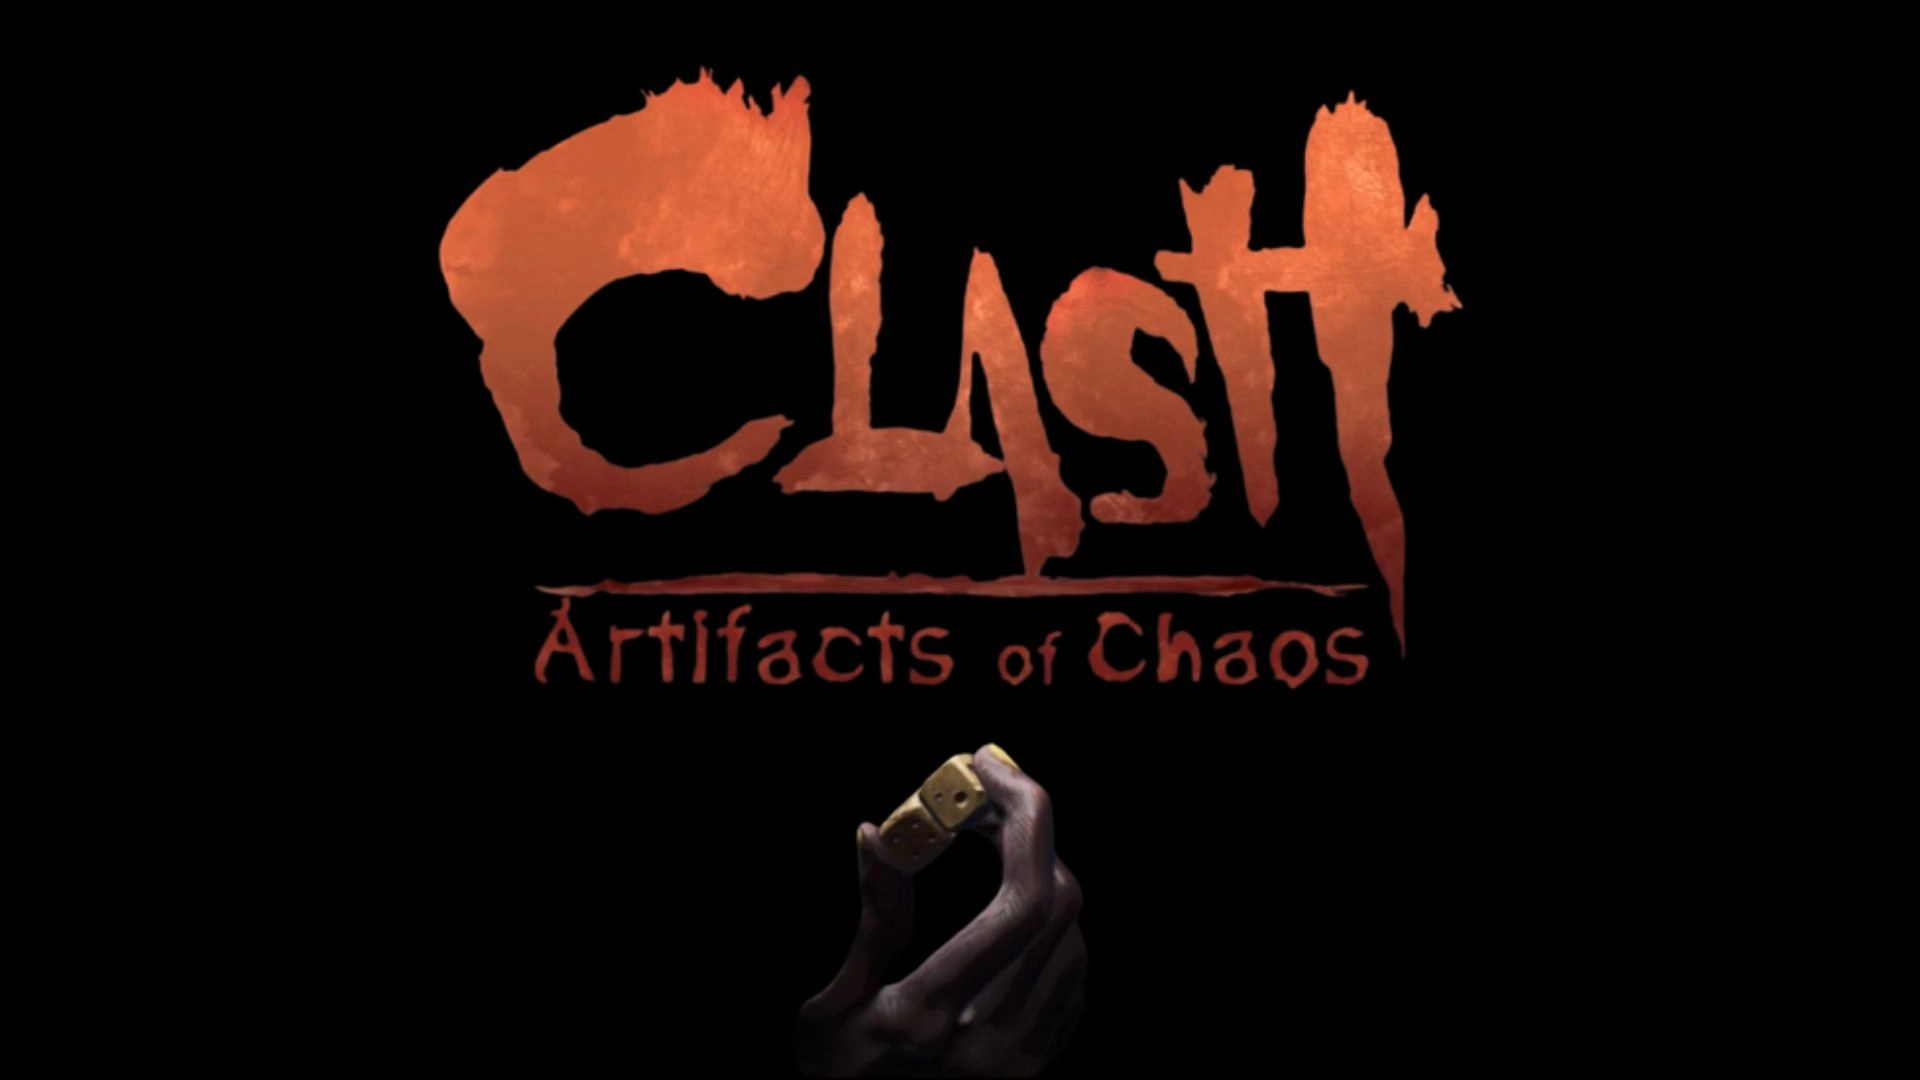 Clash: Artifacts of Chaos Parents Guide and Age Rating 2022